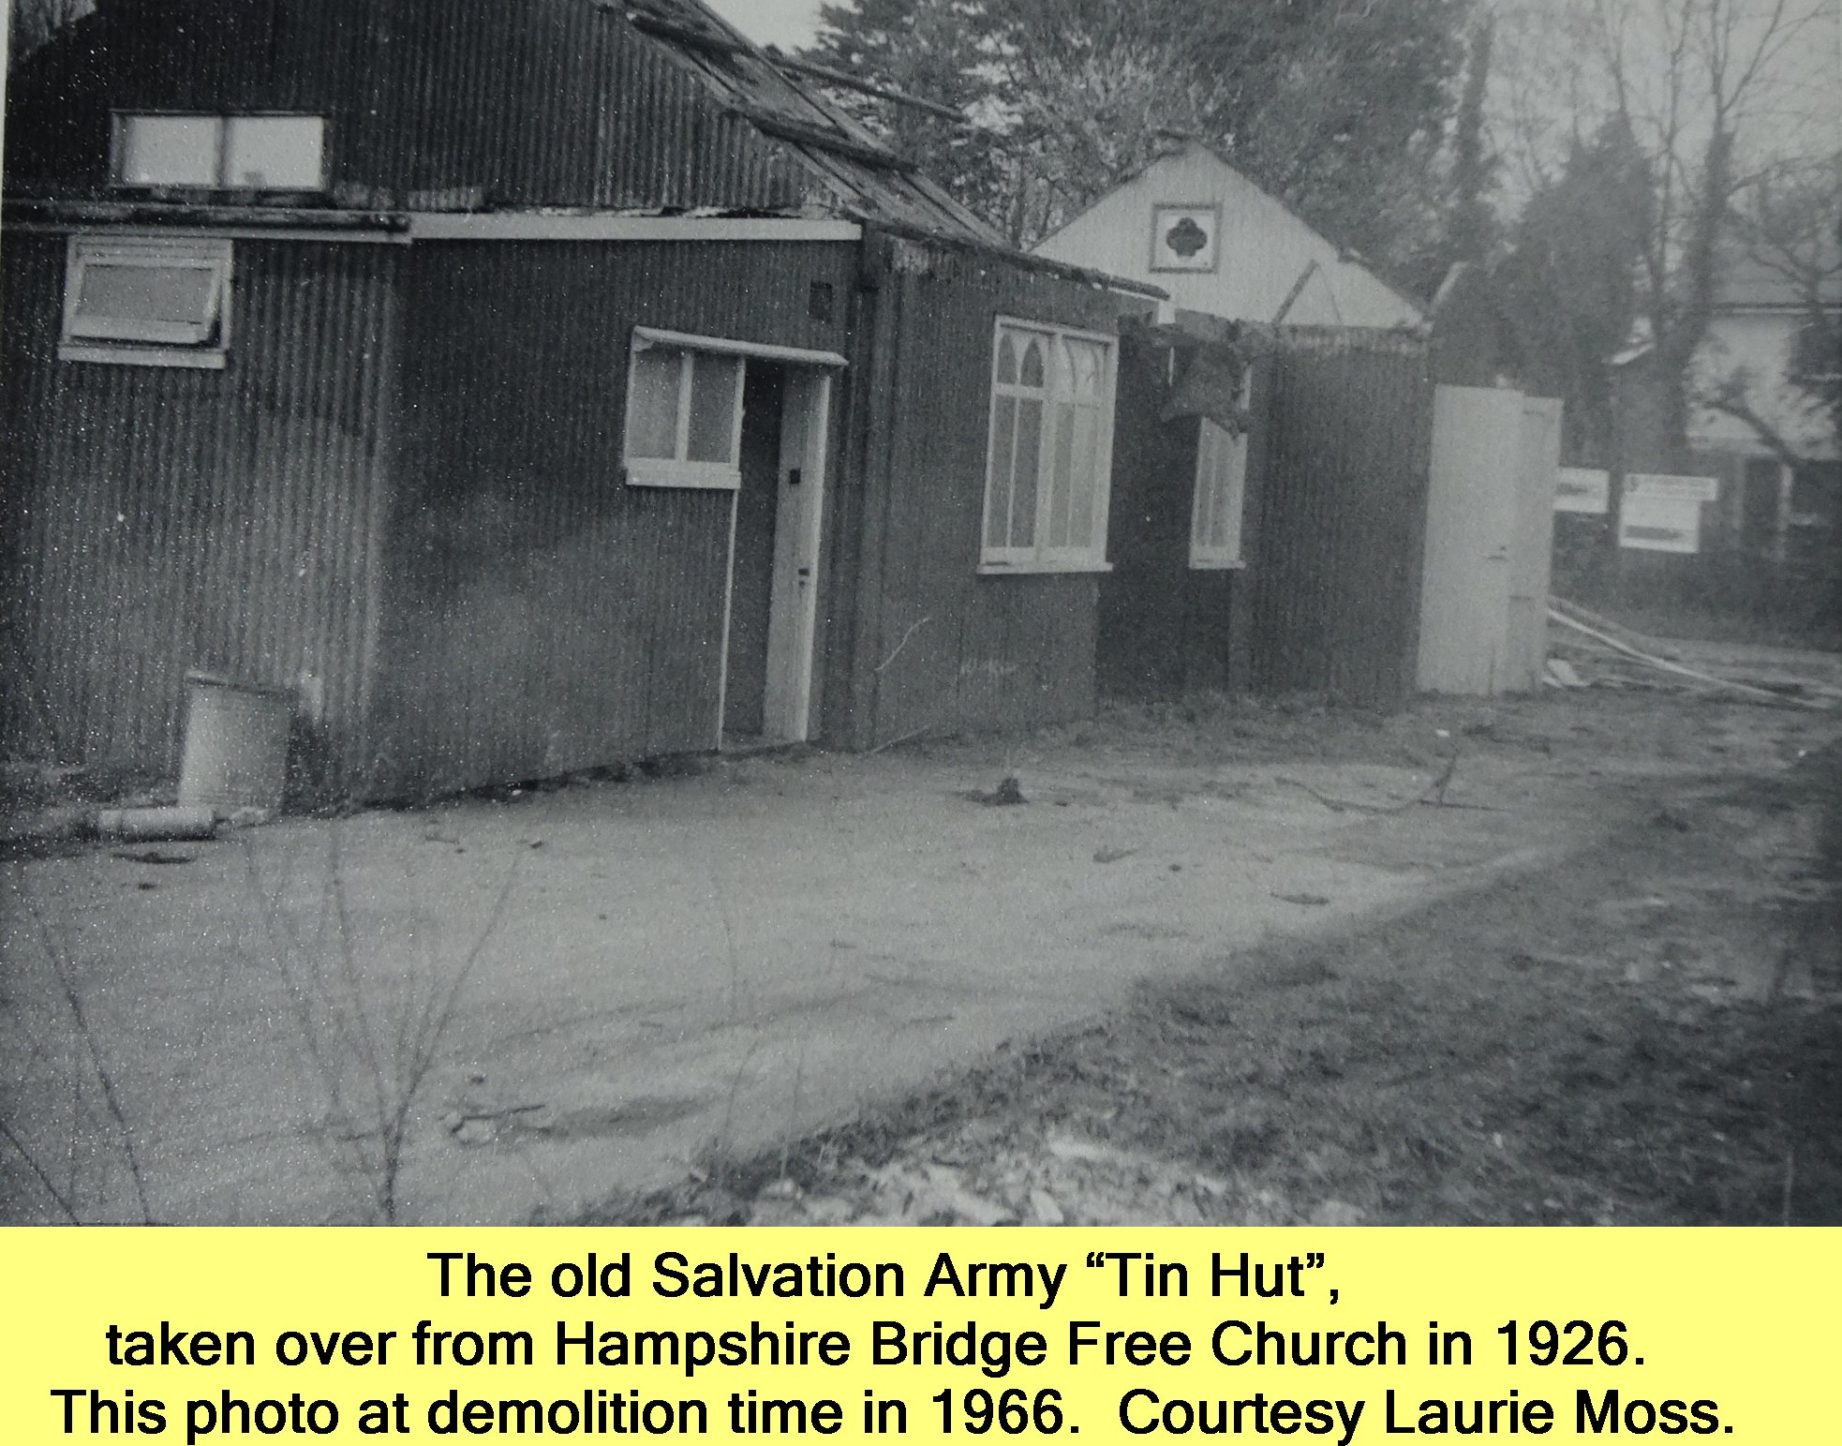 WESTBOURNE HISTORY PHOTO, SALVATION ARMY, BAND, TIN HUT, 1966. FREE CHURCH, LAURIE MOSS, DEMOLISHED